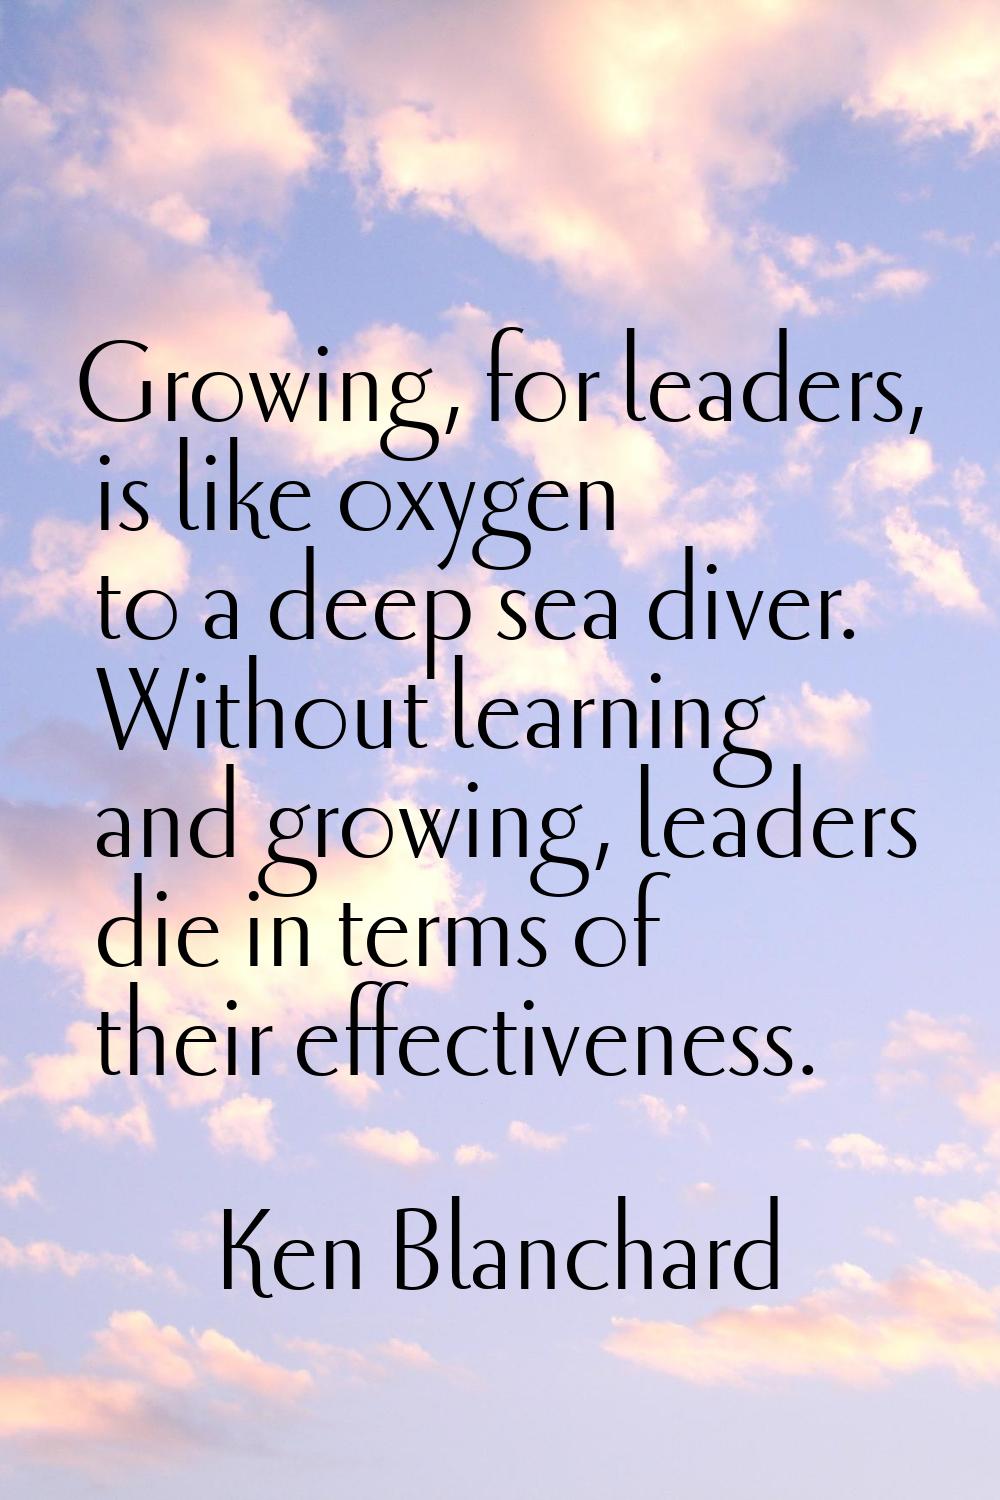 Growing, for leaders, is like oxygen to a deep sea diver. Without learning and growing, leaders die